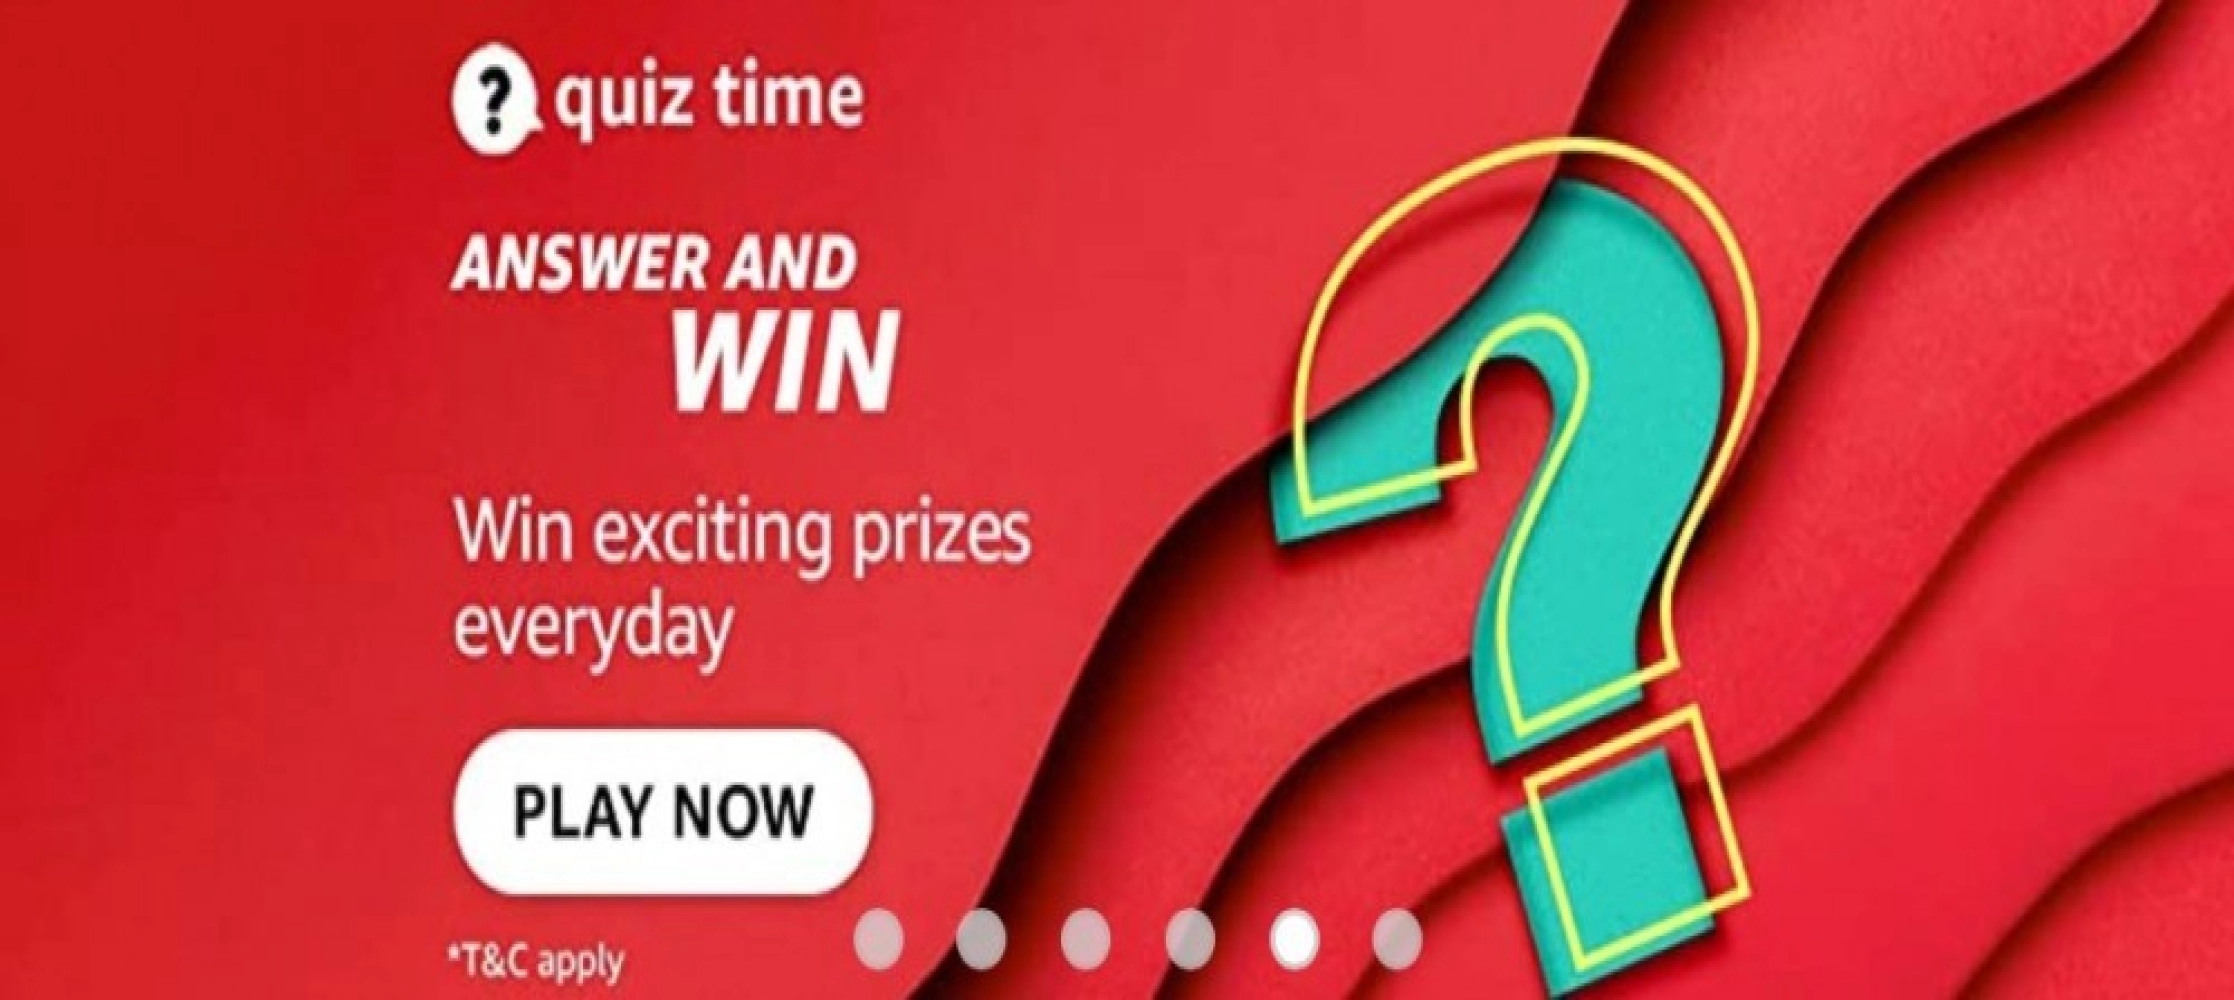 AMAZON QUIZ CONTEST: 14 MAY, 2022 - ANSWER TODAY FOR THE QUESTIONS AND GET A CHANCE TO WIN AMAZON PAY RS.1,000